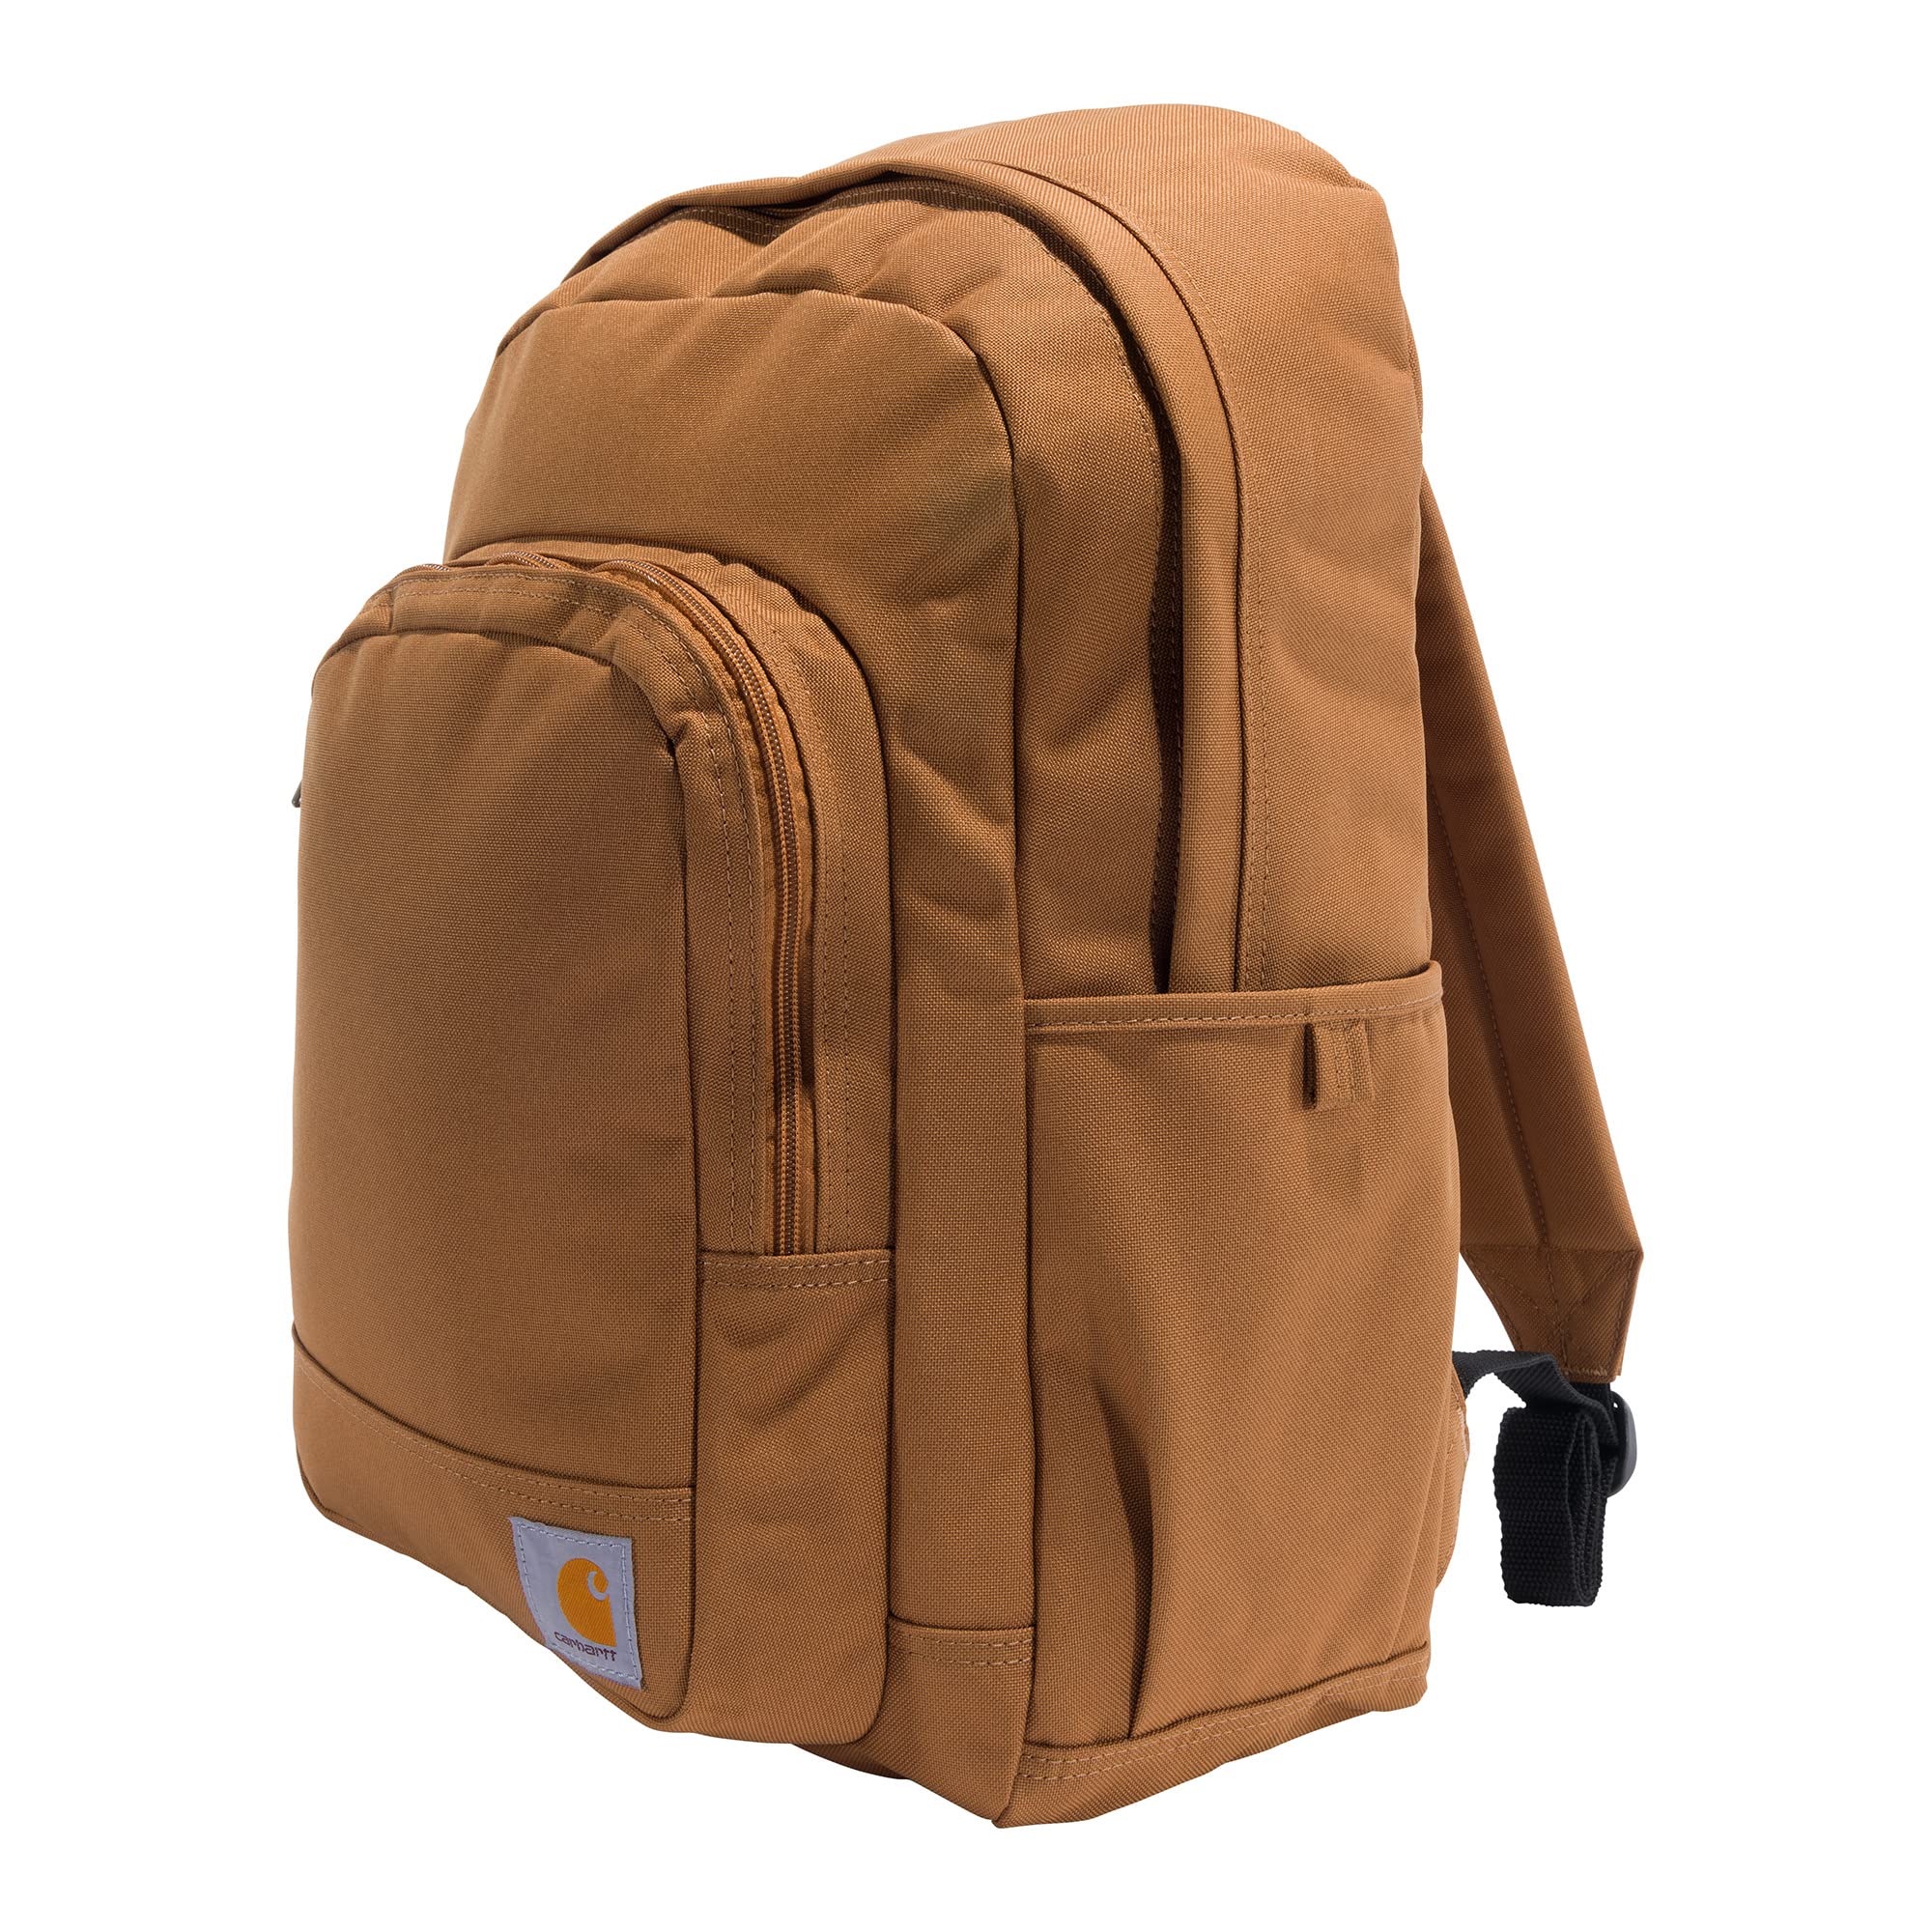 Carhartt 25L Classic Backpack, Durable Water-Resistant Pack with Laptop Sleeve, Brown, One Size